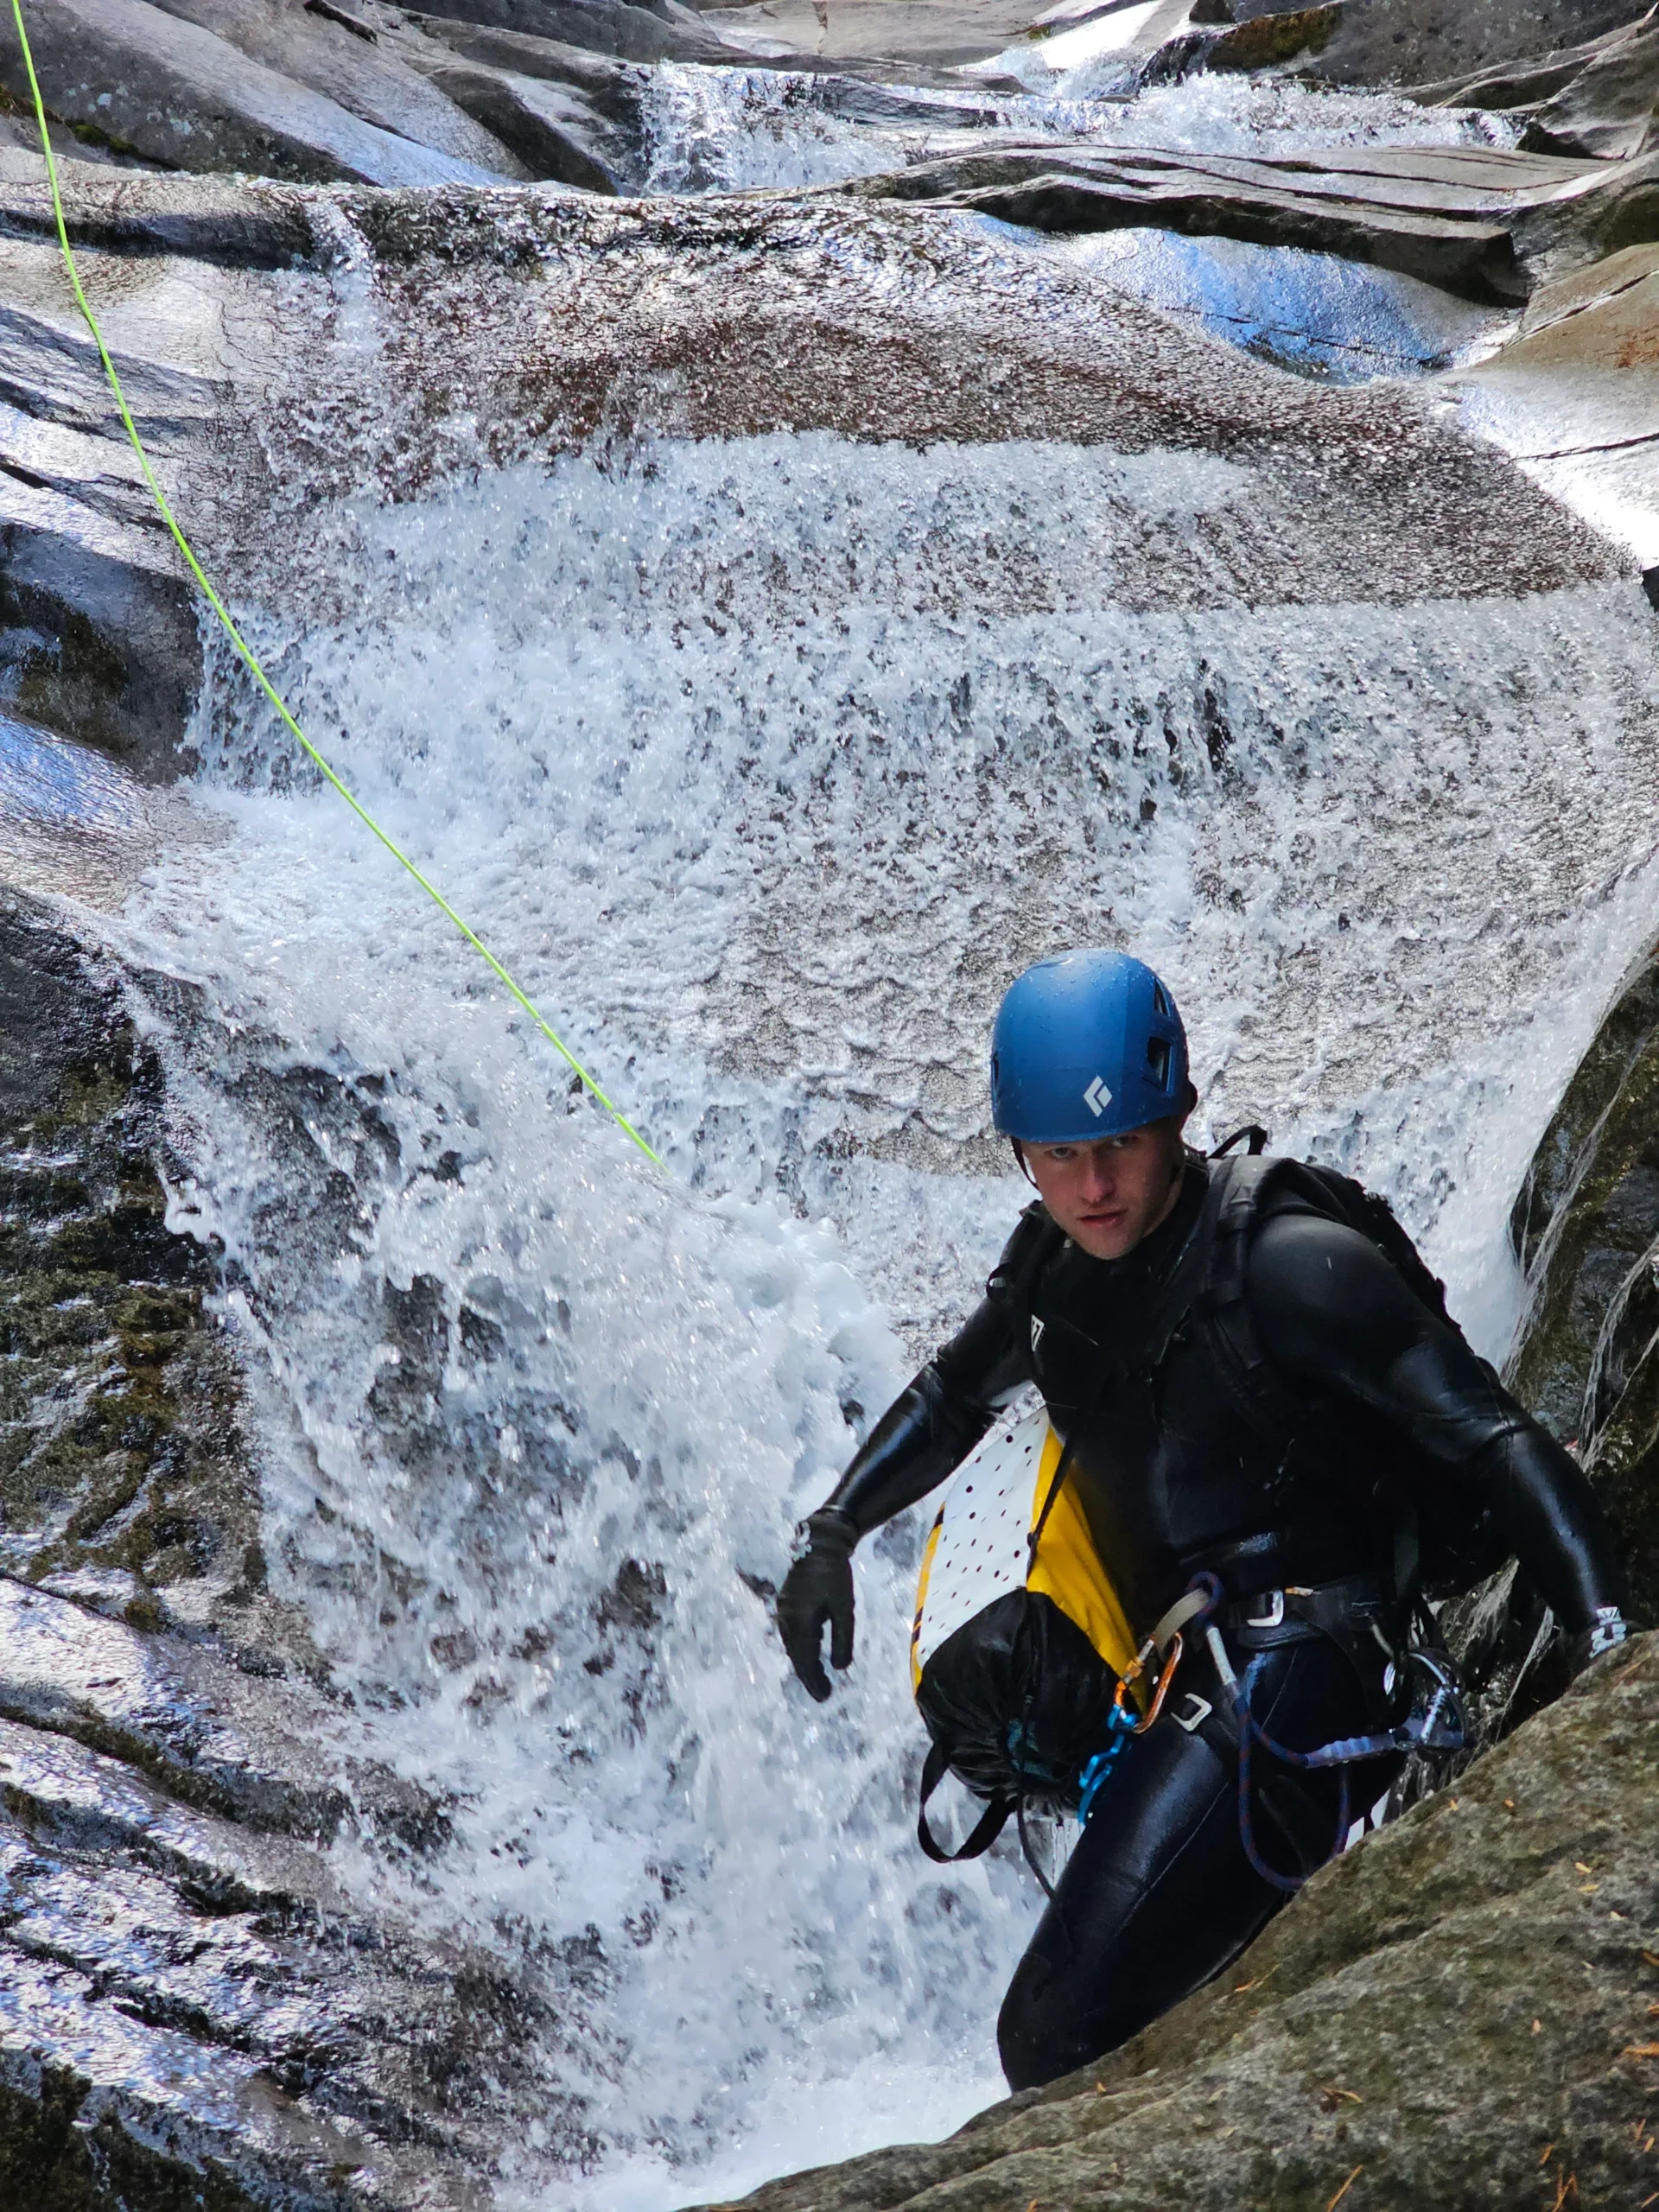 Swiftwater for Desert Canyoneers